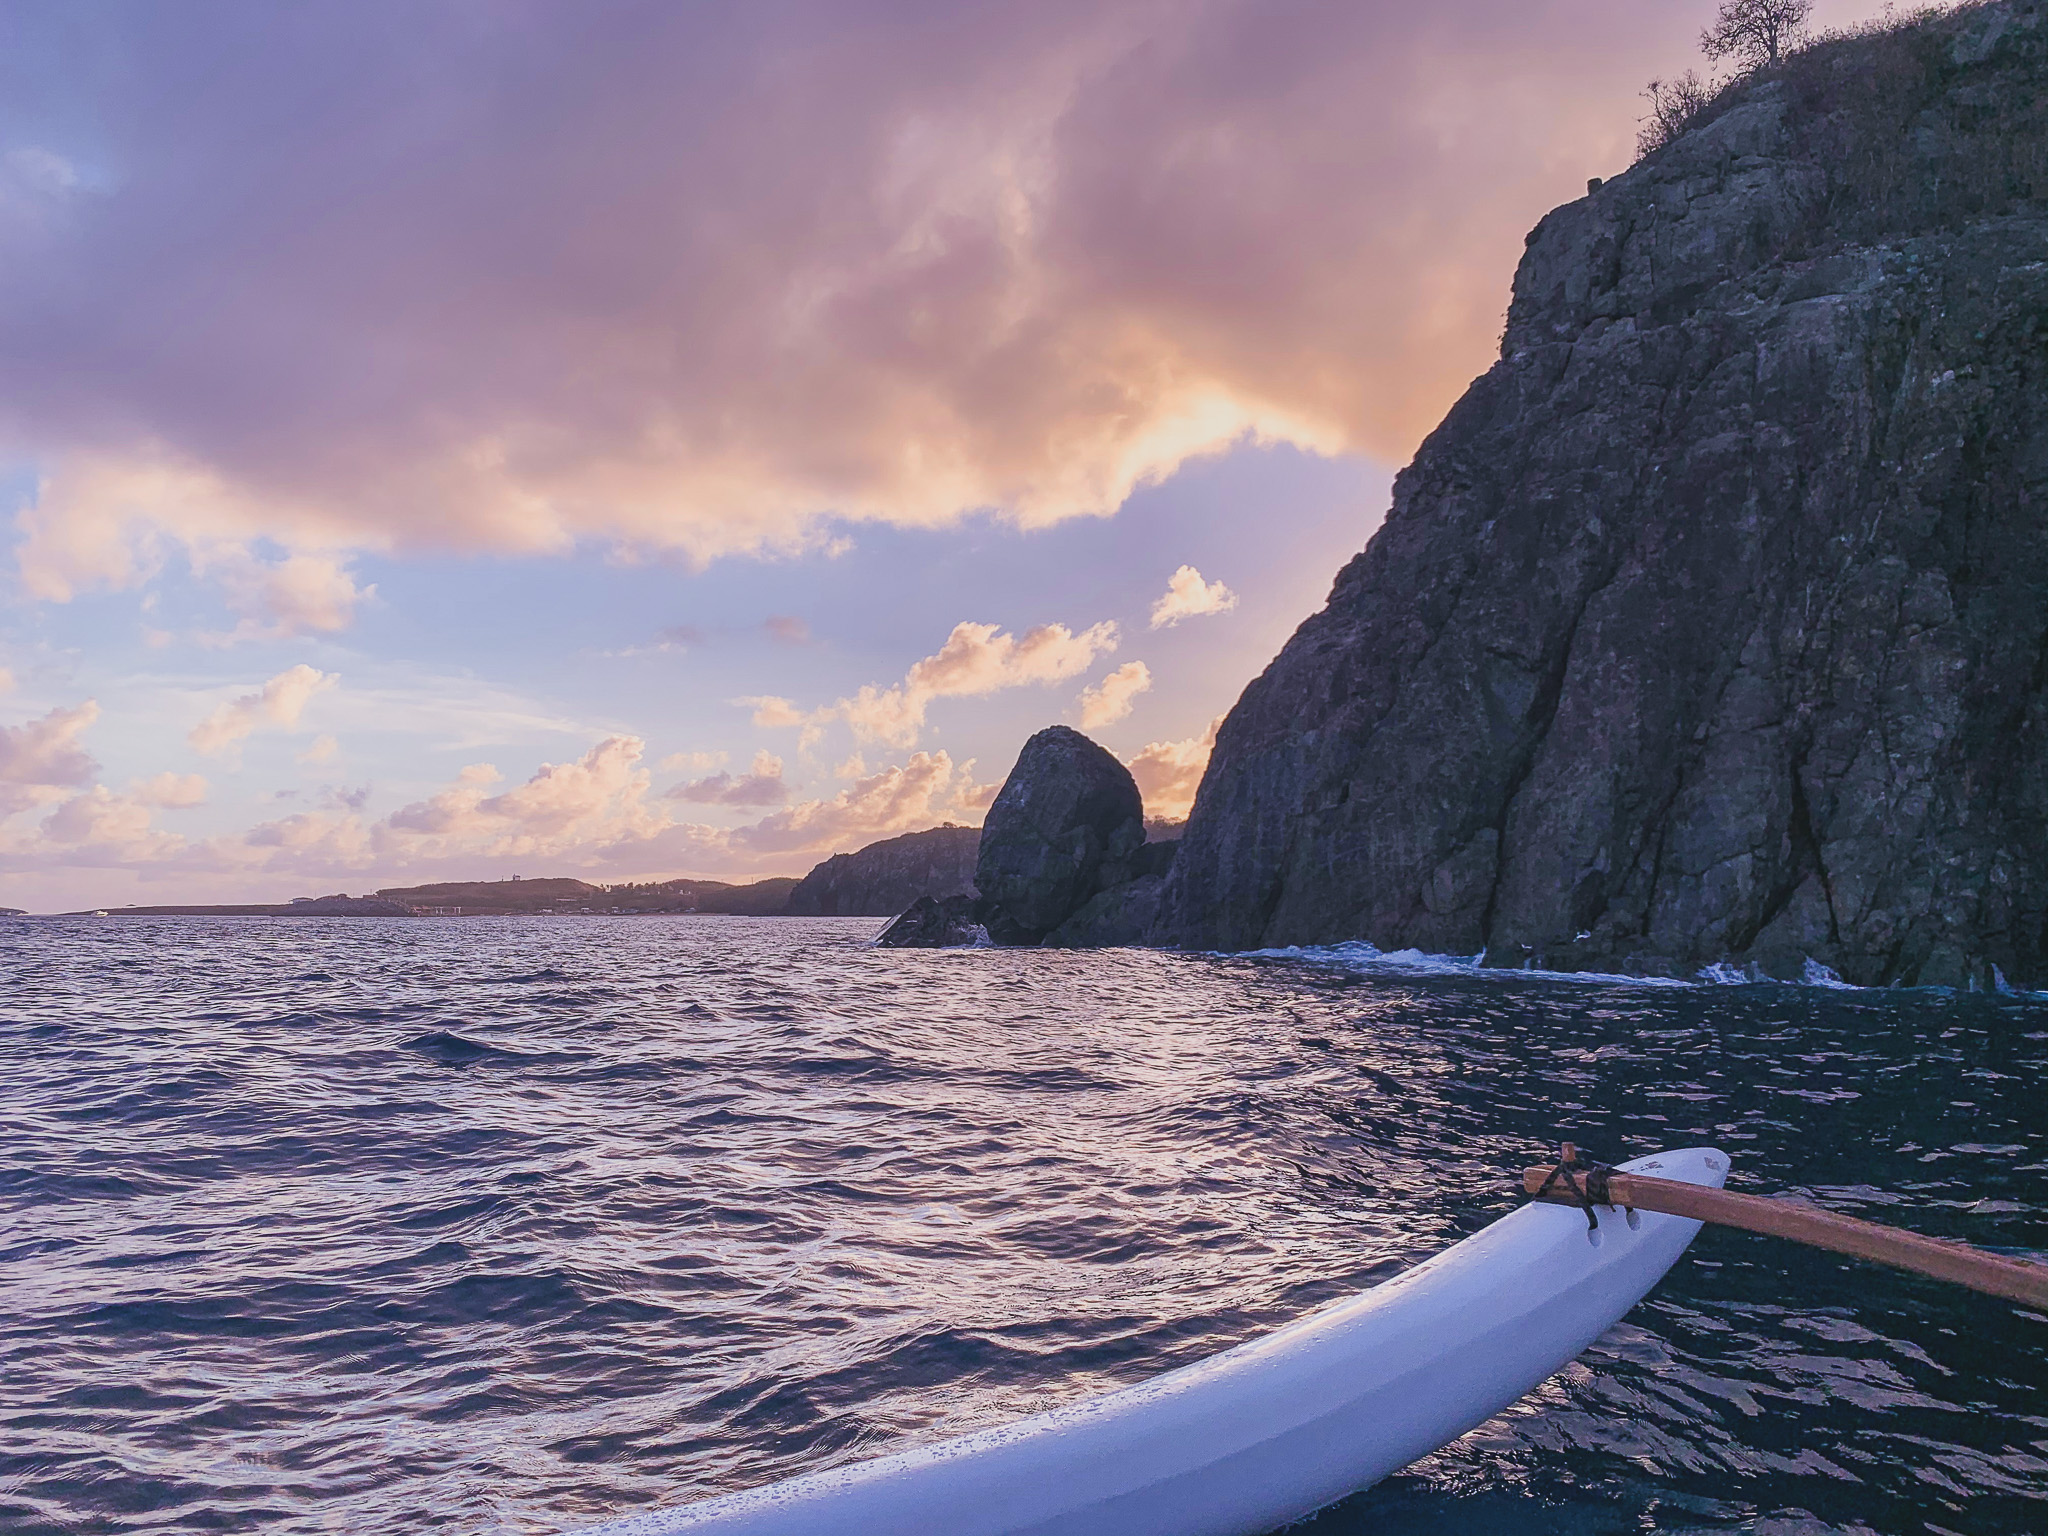 canoeing at sunset time in Noronha, Brazil